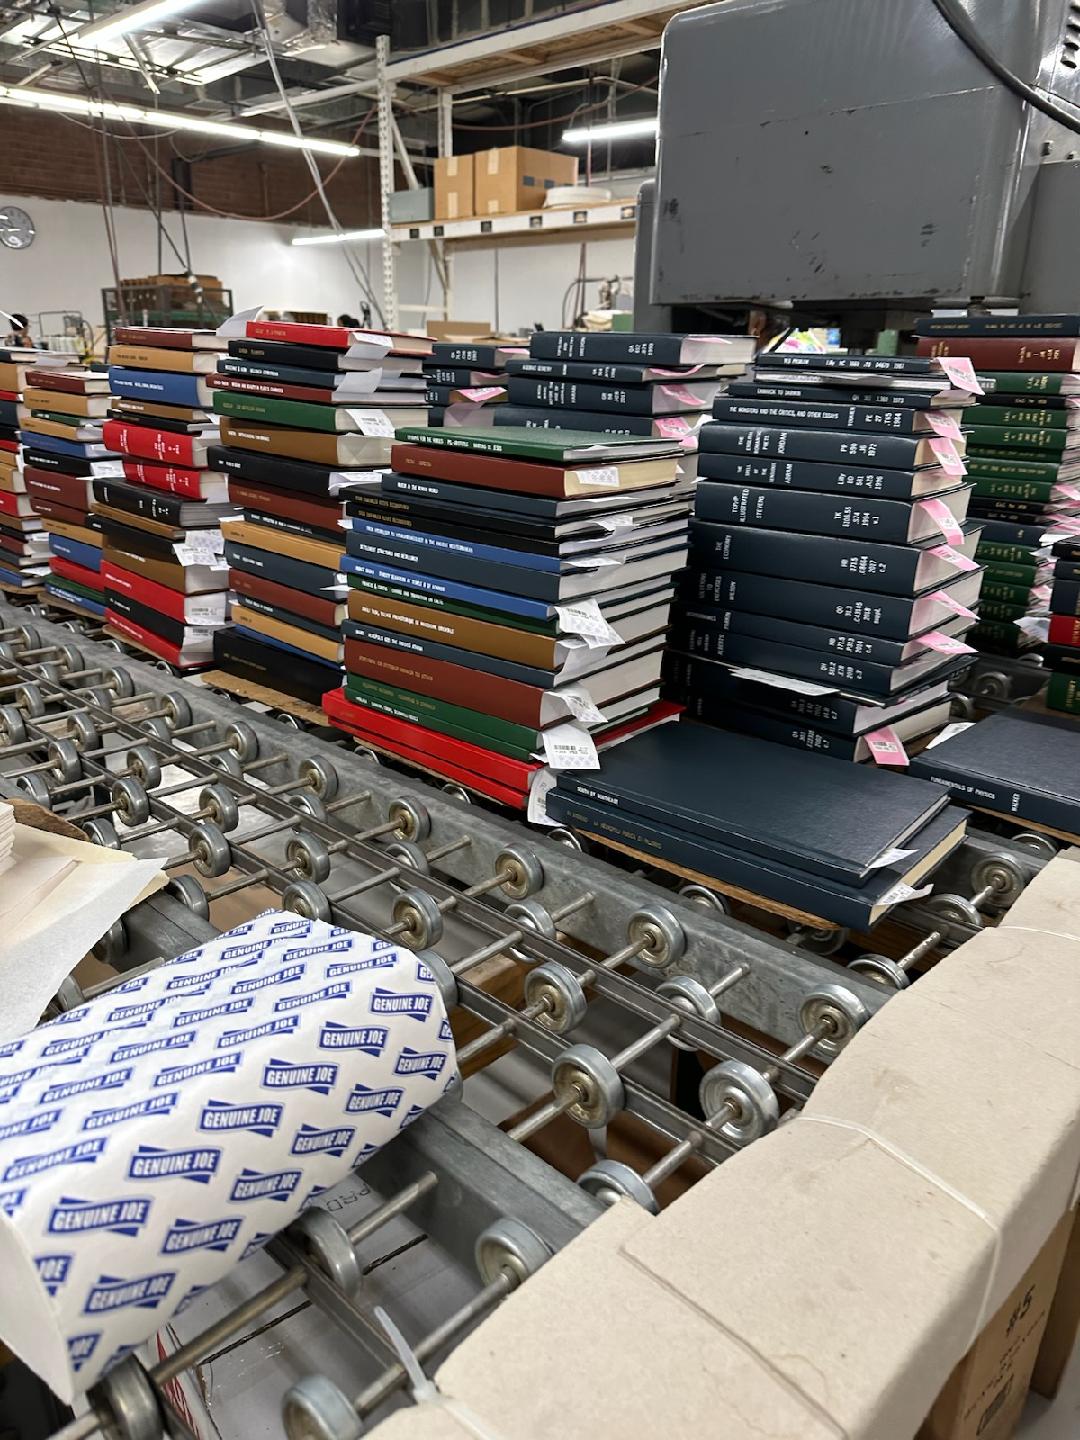 Stacks of commercially-bound books for the libraries with different cover colors.